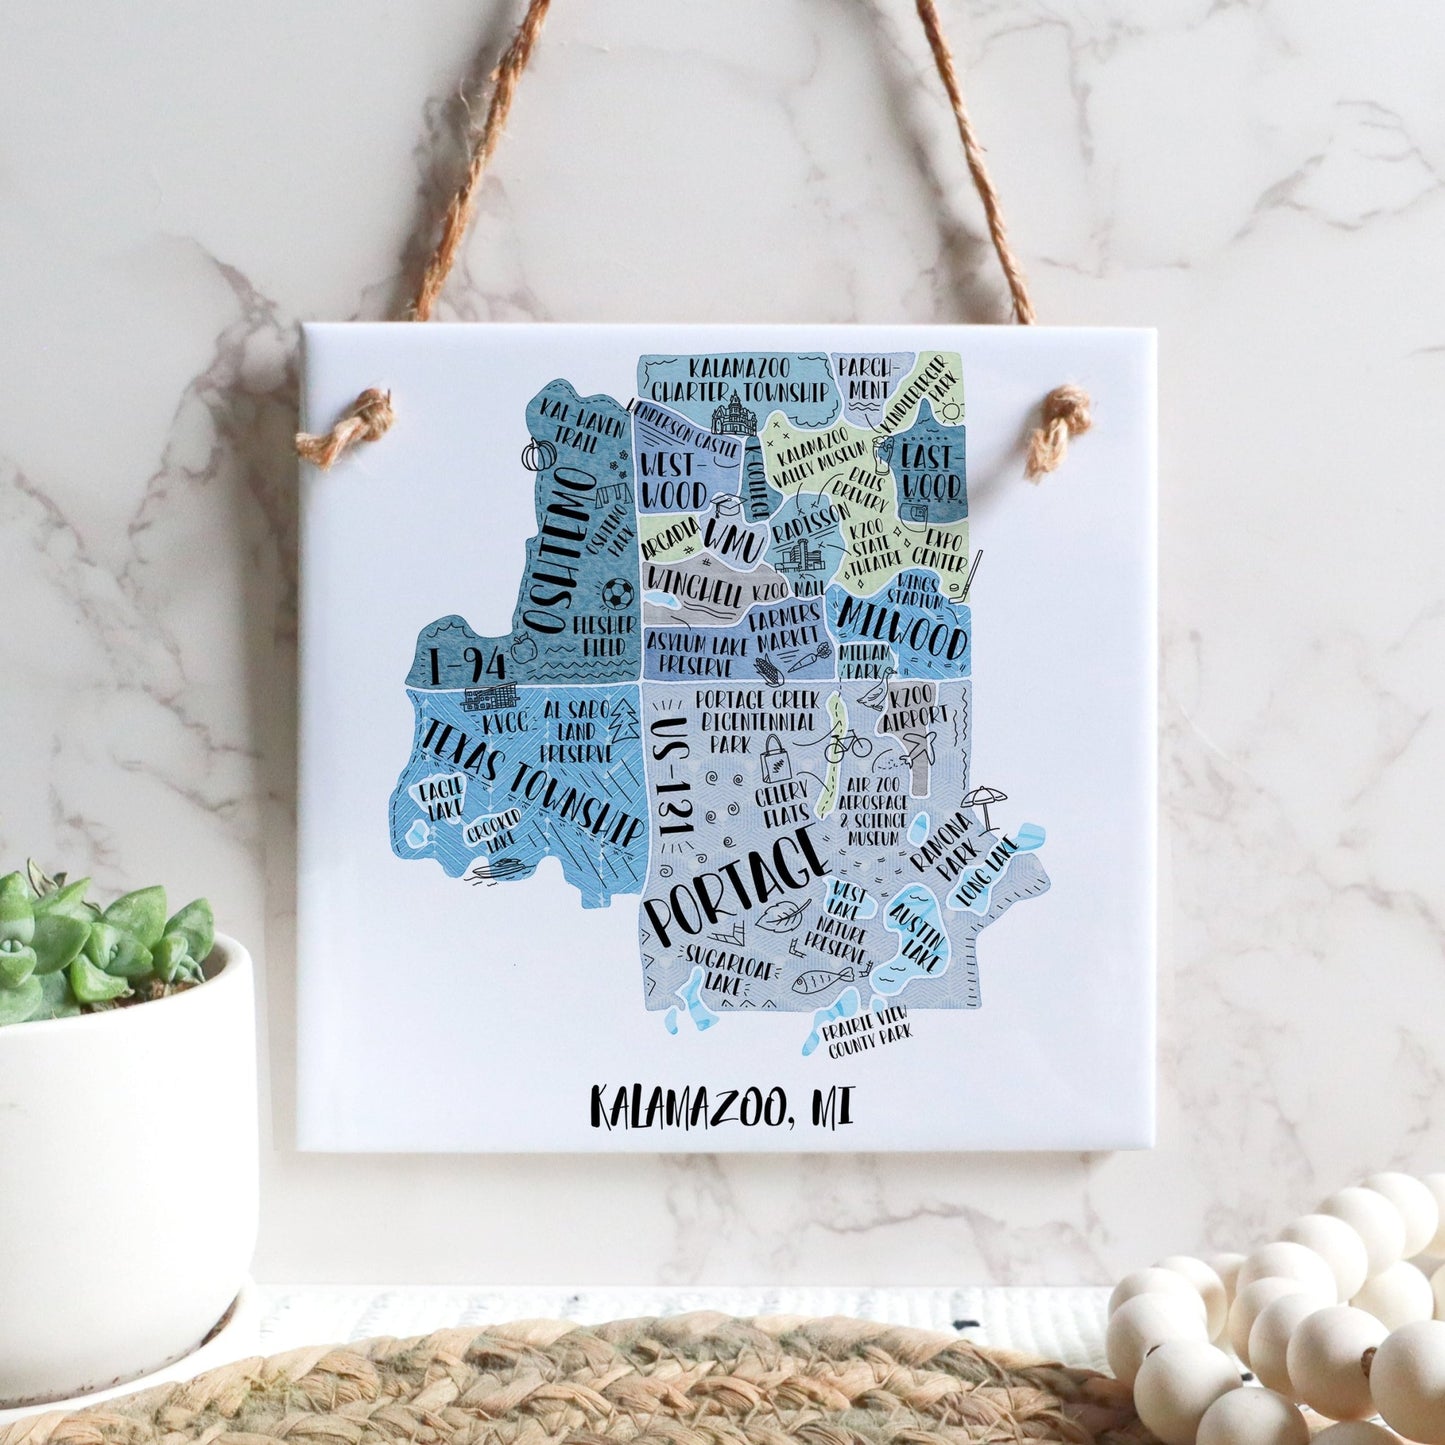 A hand-drawn tourist map of Kalamazoo MI on a square tile sign hanging on a wall - in the color blue